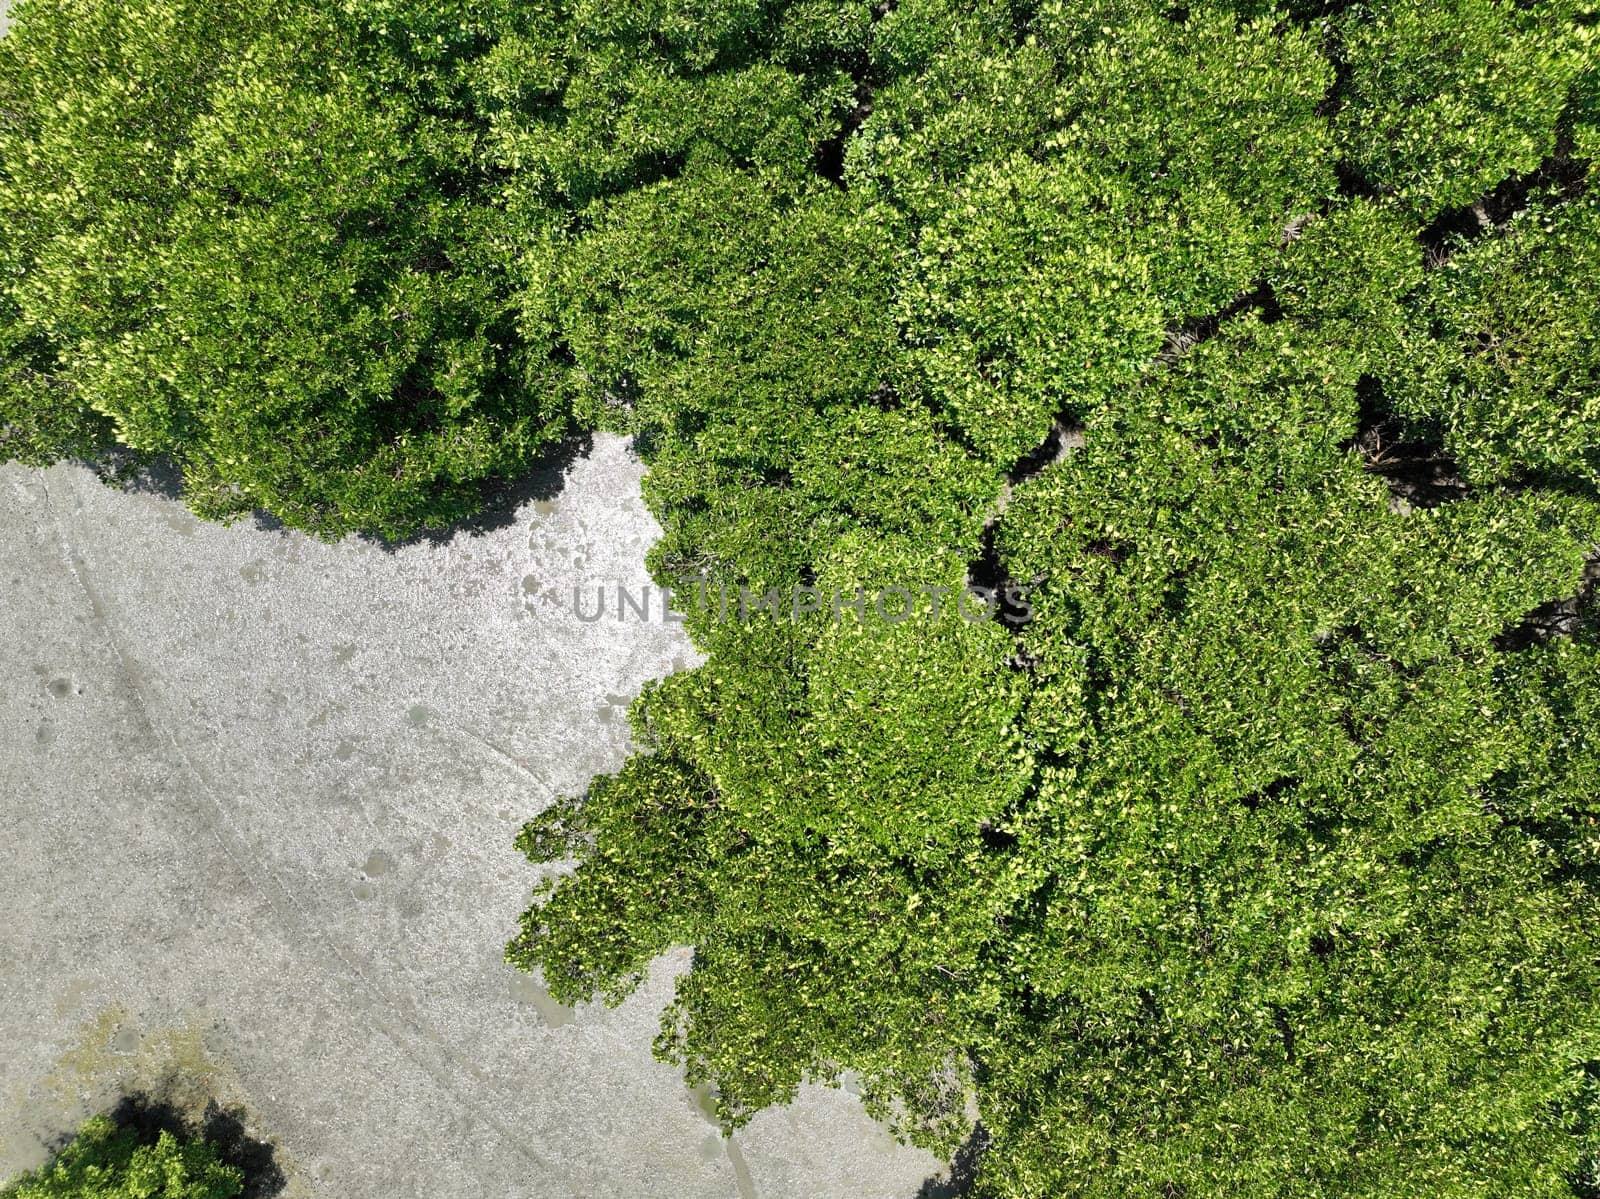 Green mangrove forest with morning sunlight. Mangrove ecosystem. Natural carbon sinks. Mangroves capture CO2 from the atmosphere. Blue carbon ecosystems. Mangroves absorb carbon dioxide emissions. by Fahroni